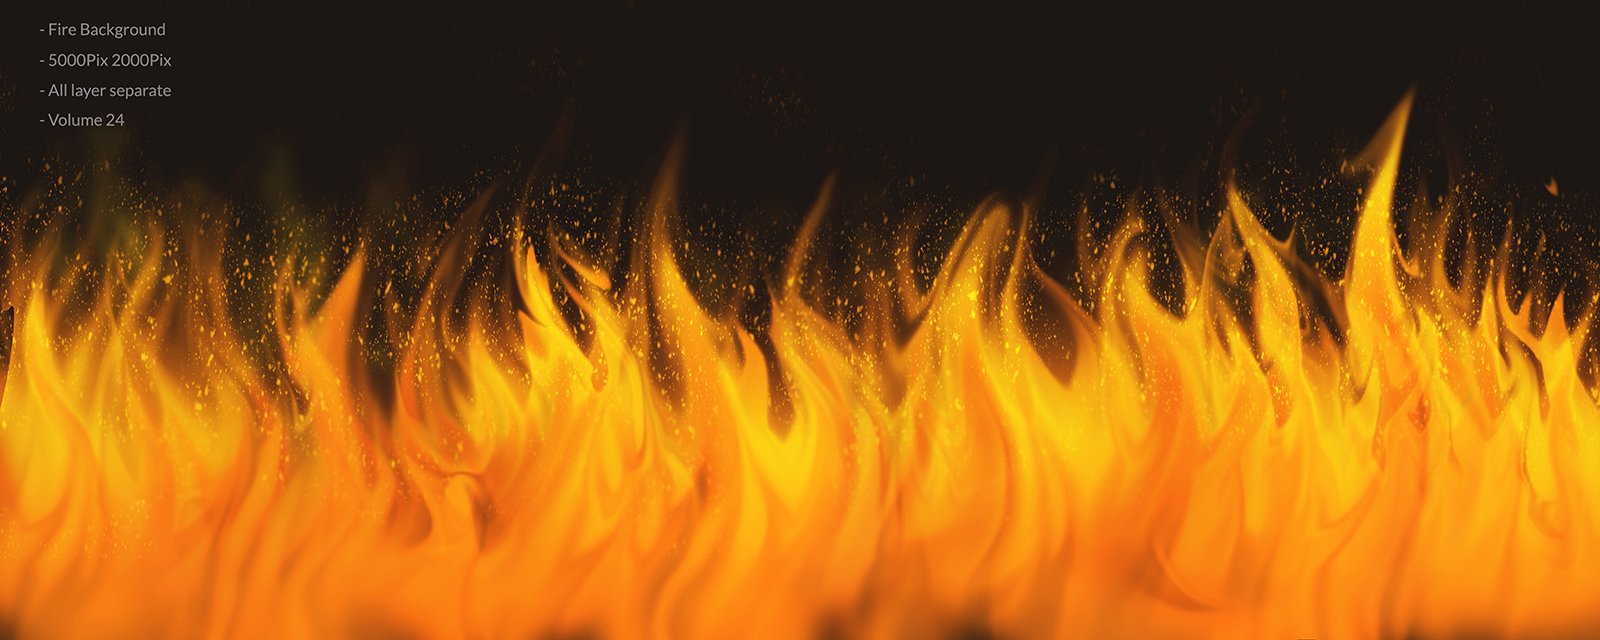 fire background 24 831